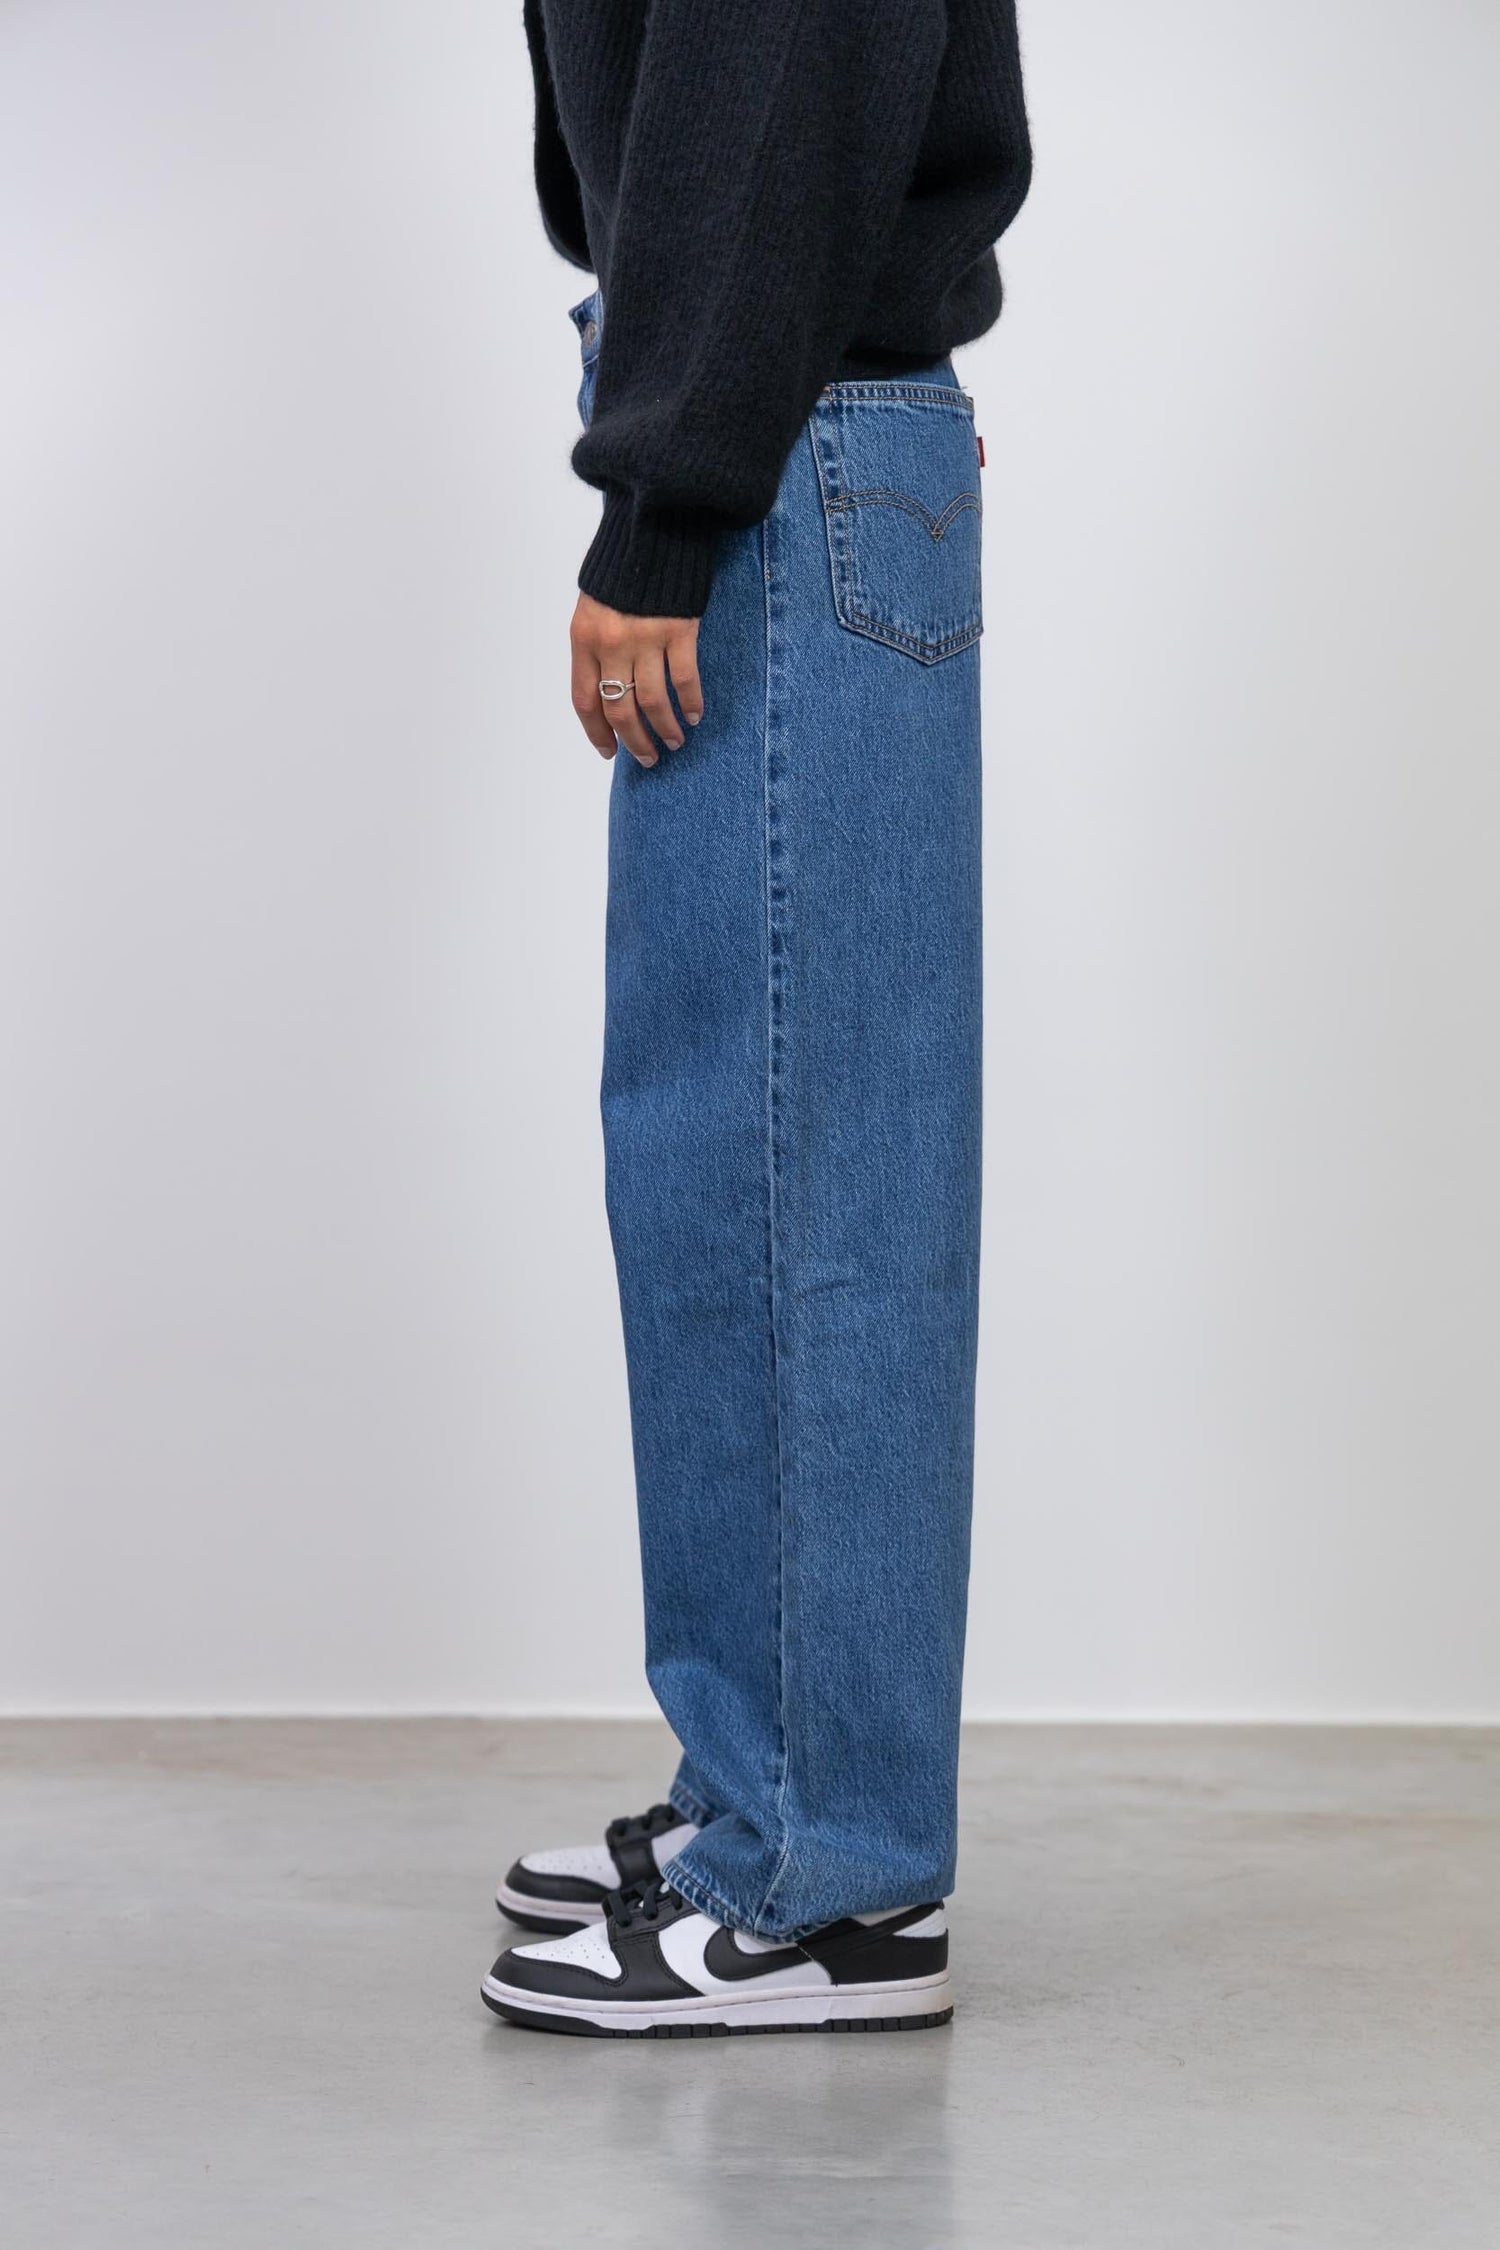 BAGGY DAD RELAXED FIT JEANS IN DARK BLUE JEANS LEVIS 